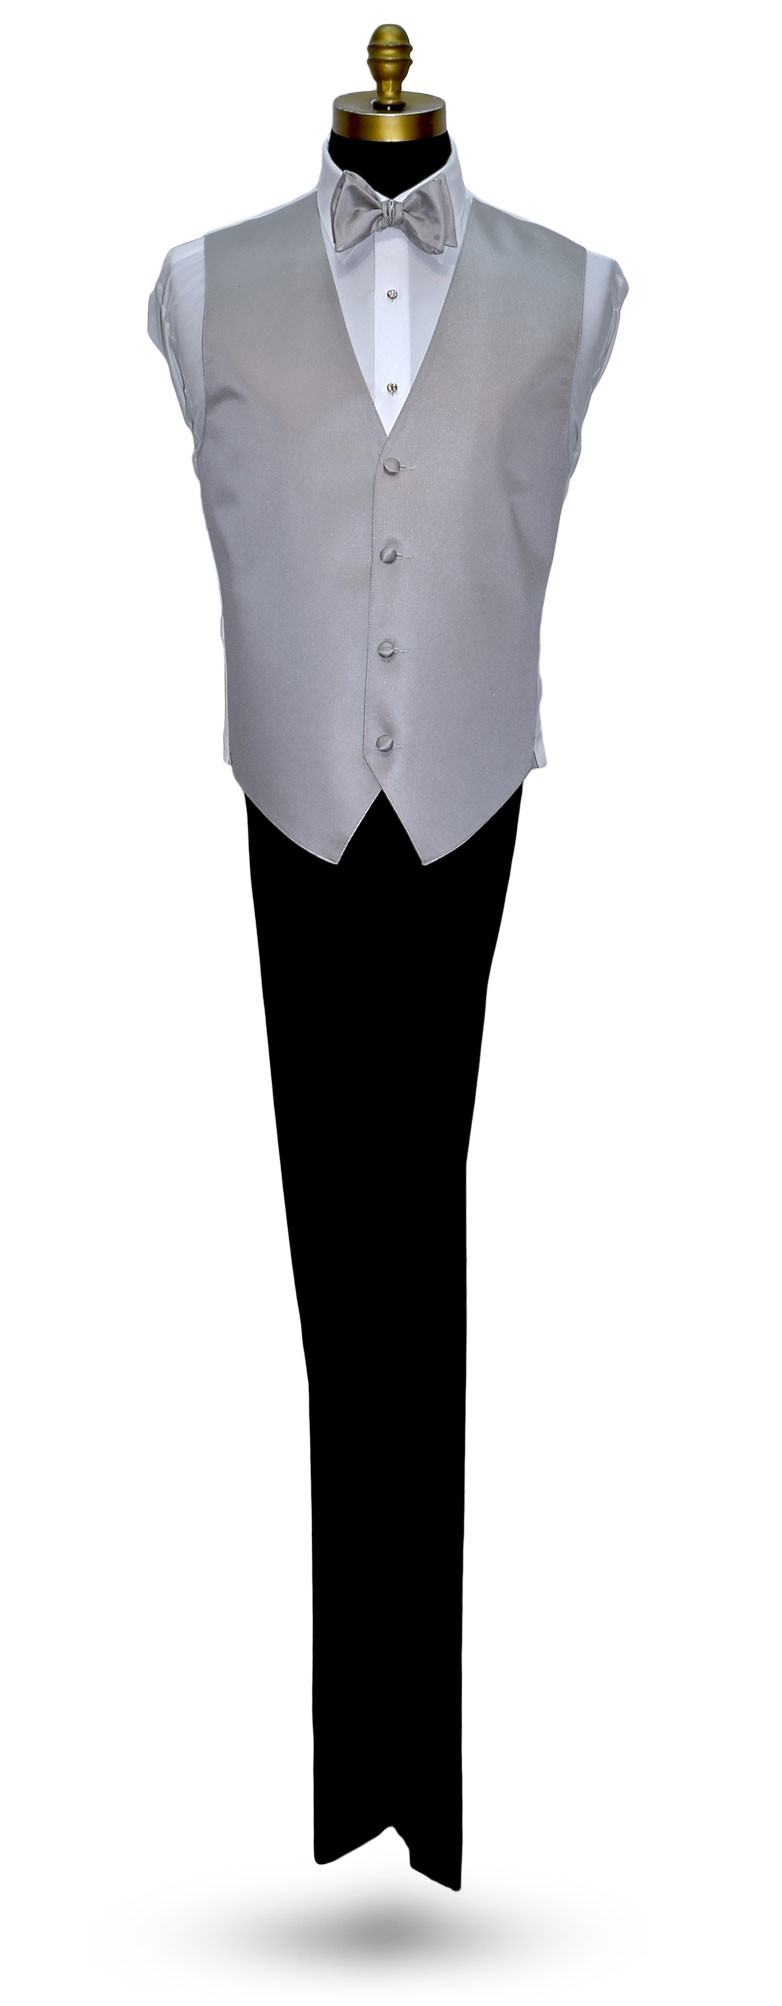 moonlight gray tuxedo vest and bowtie with black tuxedo by San Miguel Formals